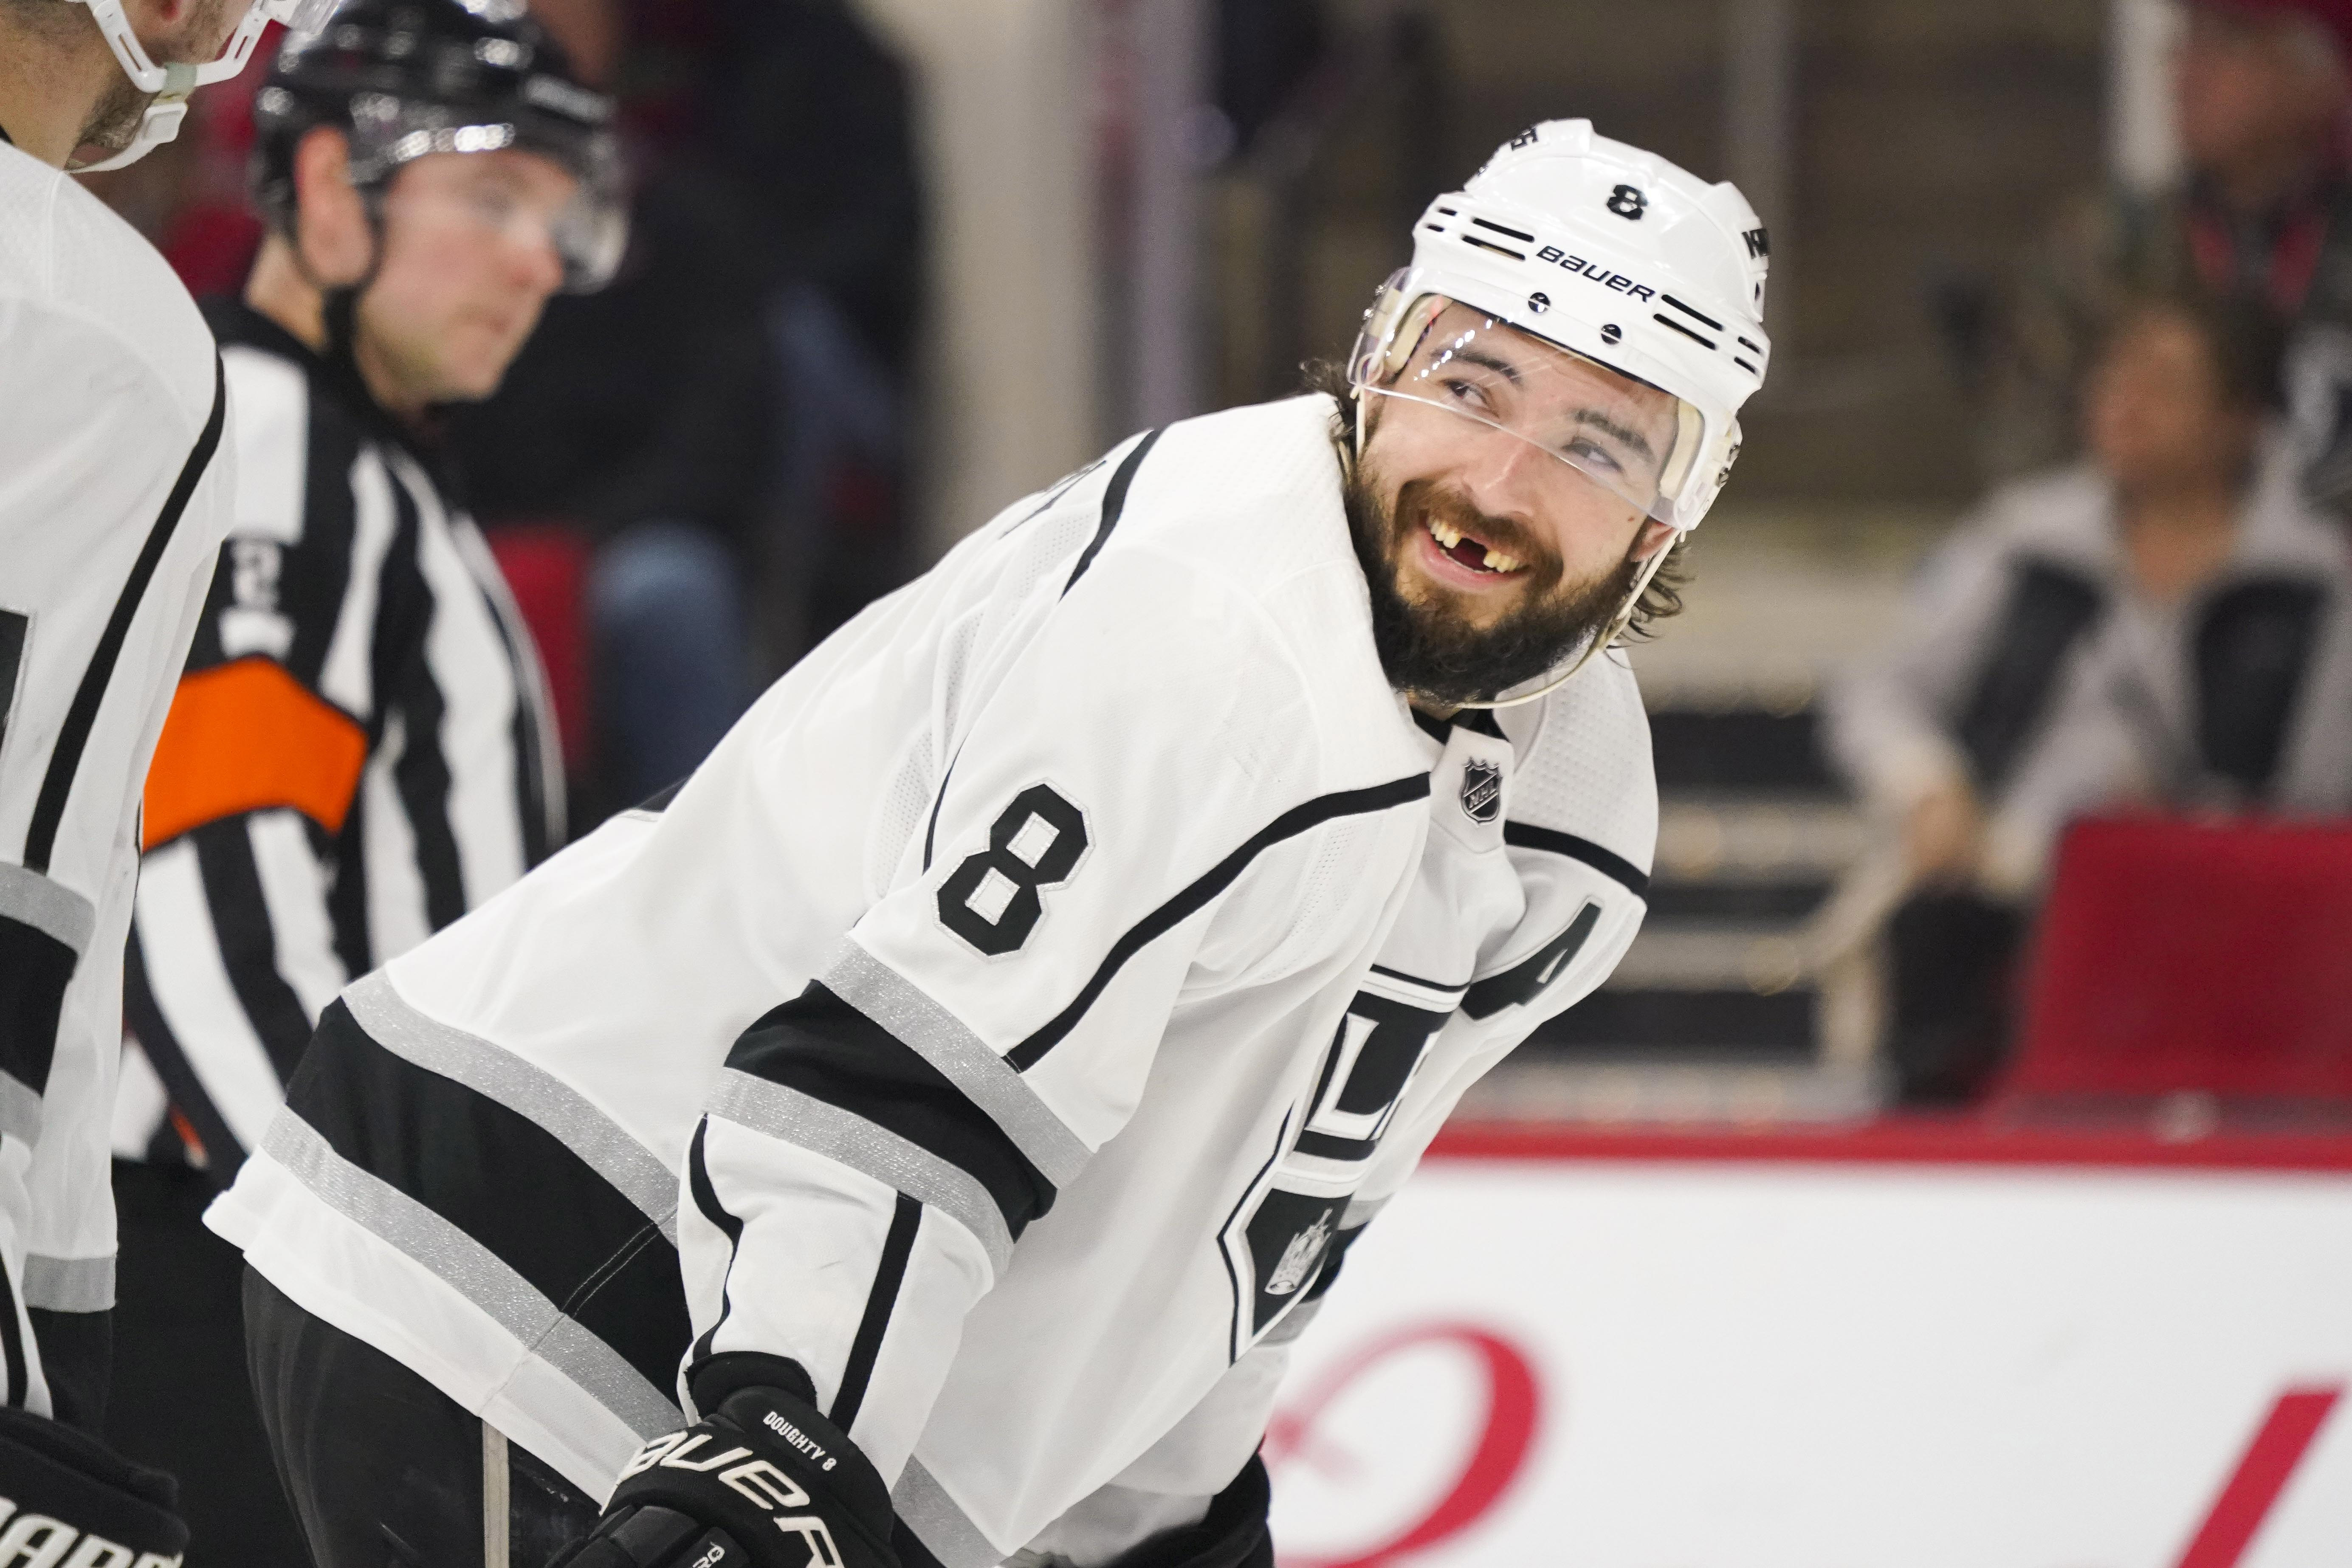 LA Kings and defenseman Drew Doughty have agreed to terms on an 8-year contract extension